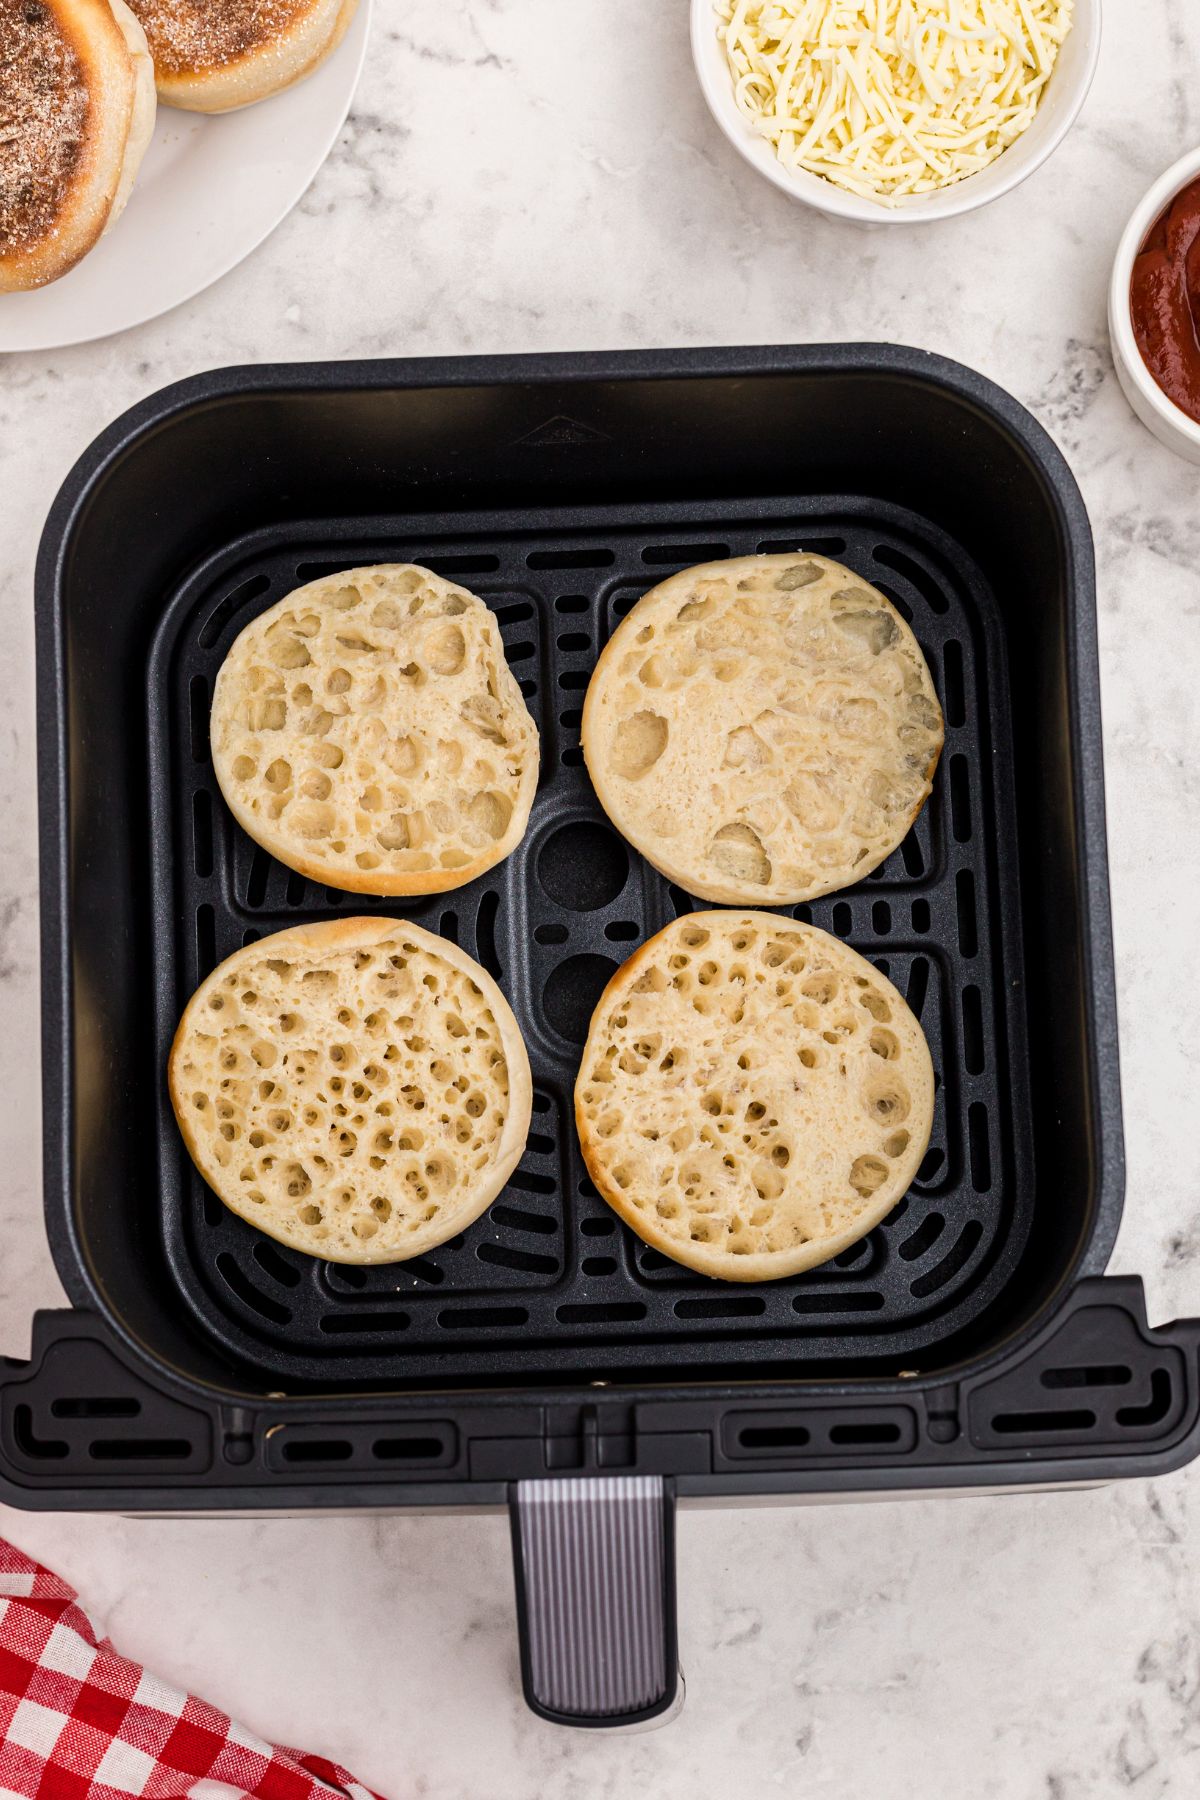 English muffins in the air fryer basket, being lightly toasted.